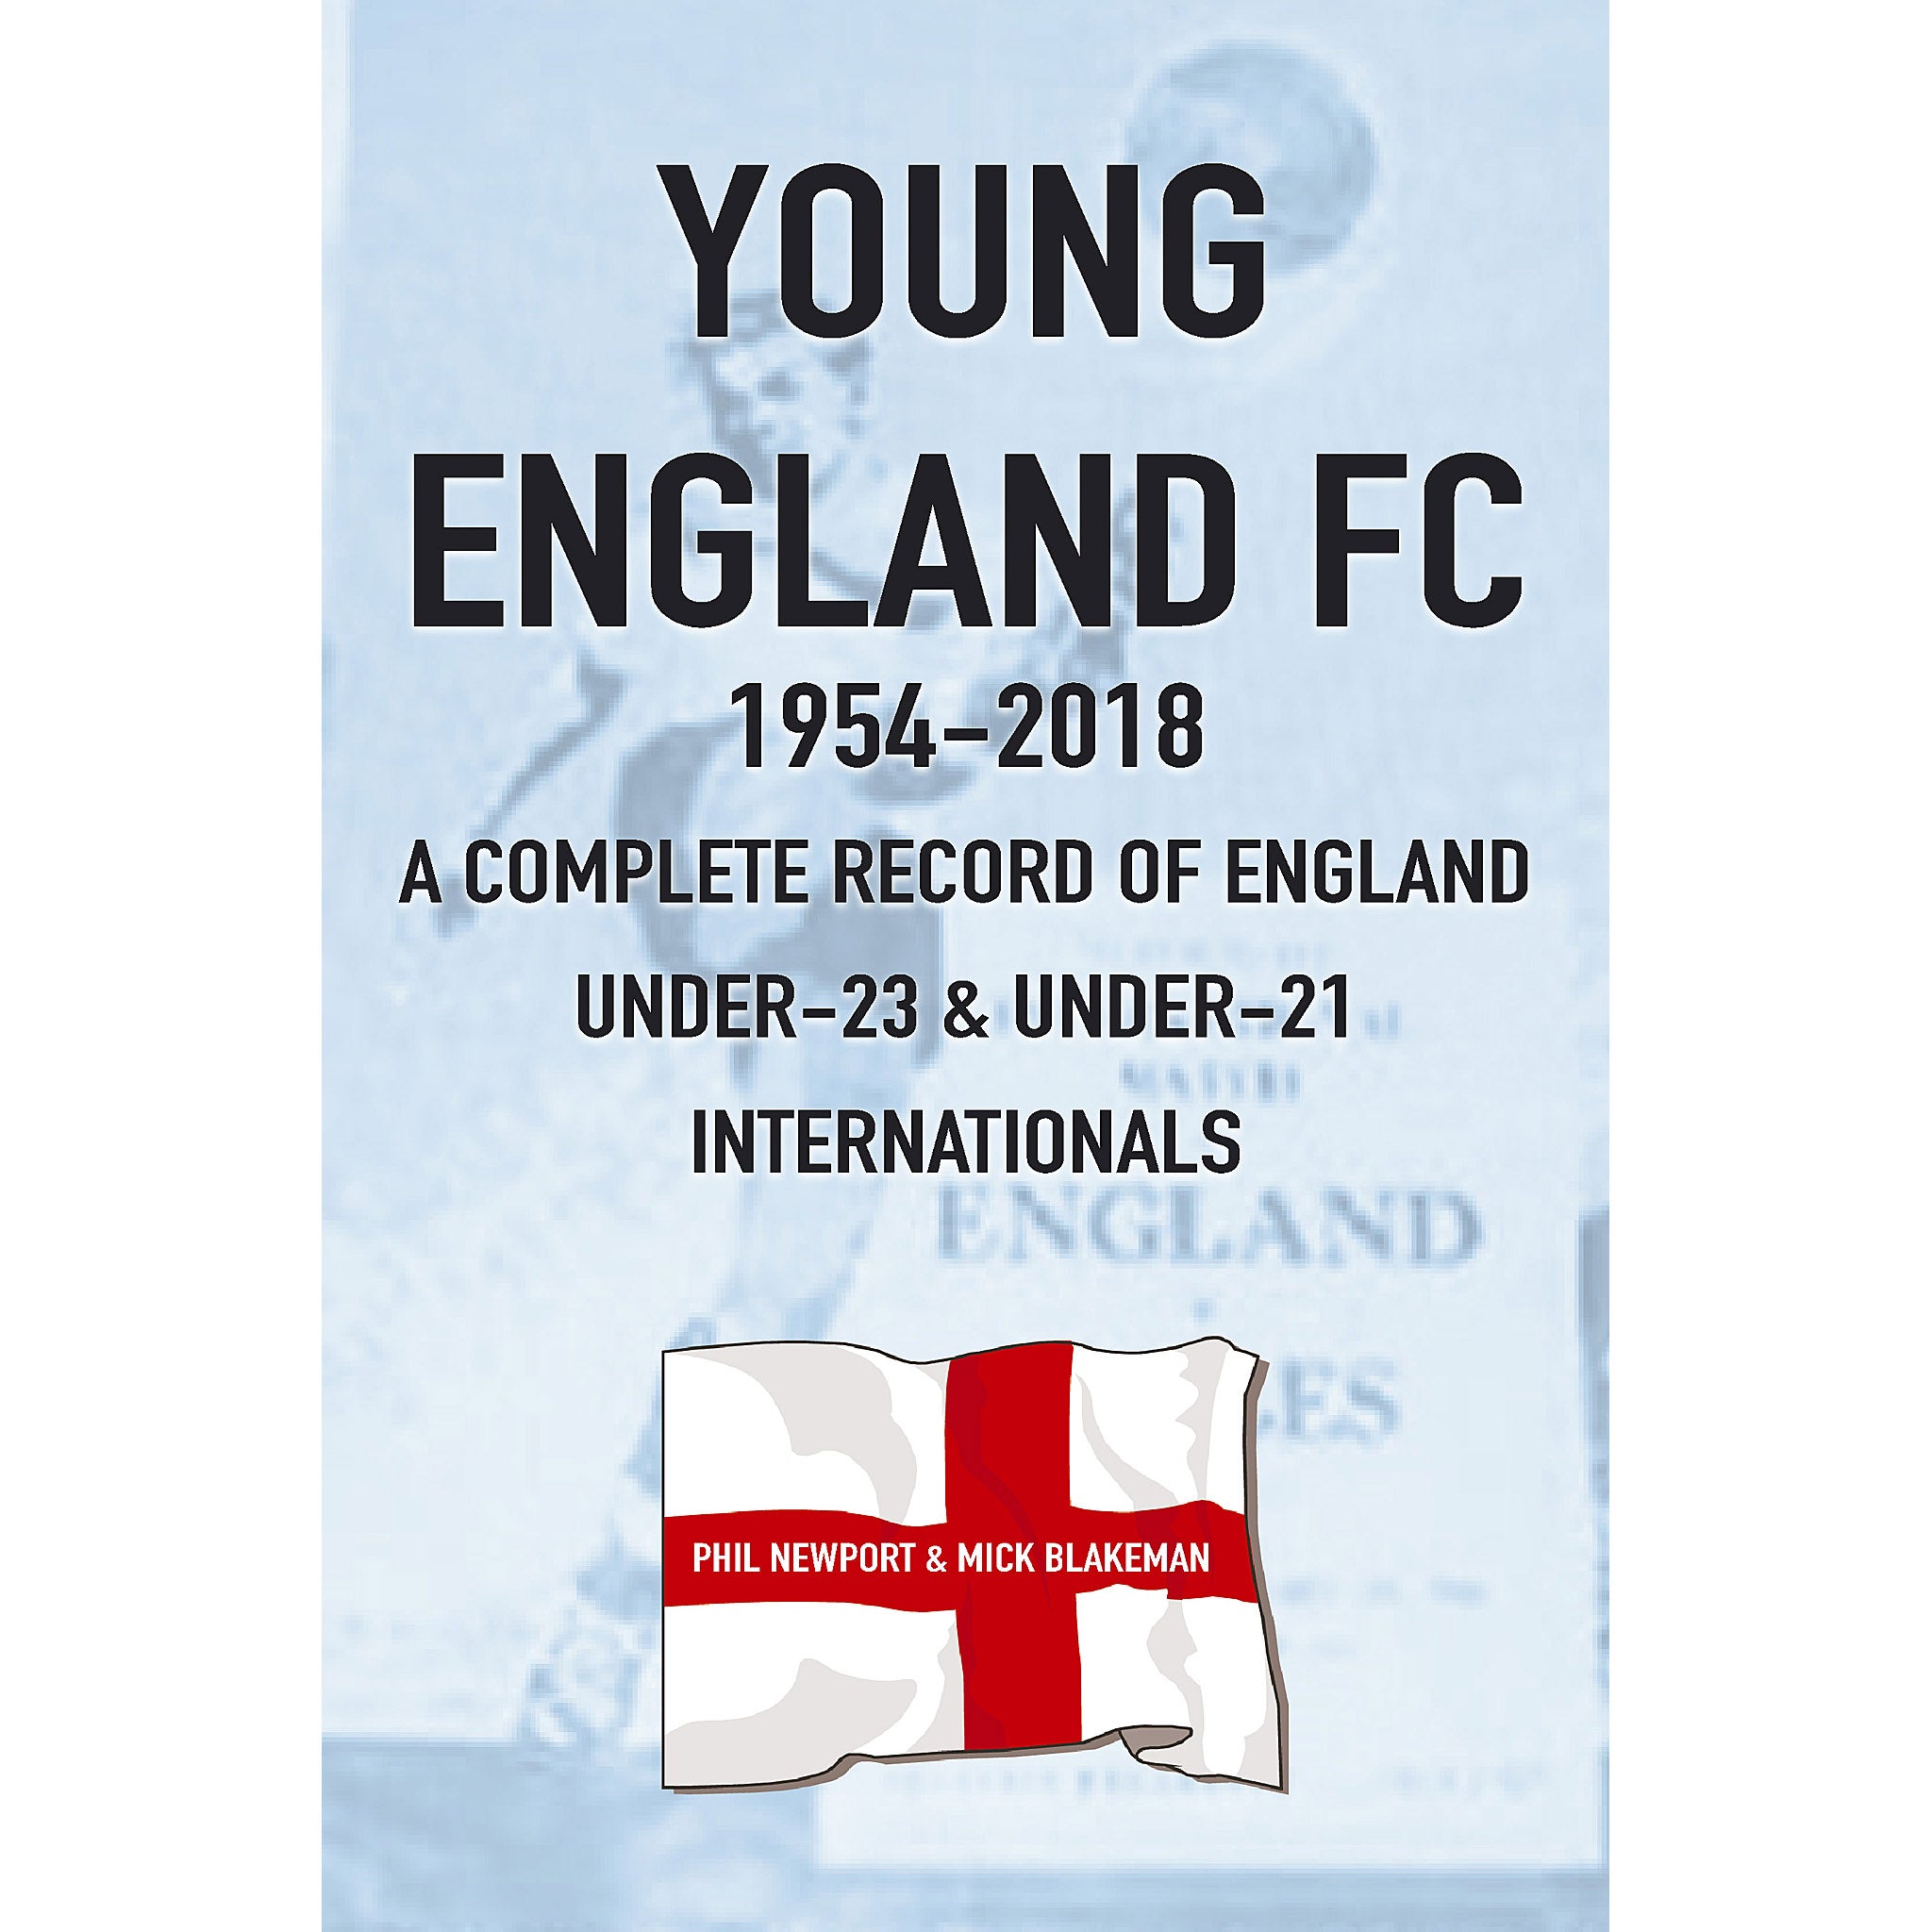 Young England FC 1954-2018 – A Complete Record of England Under-23 & Under-21 Internationals